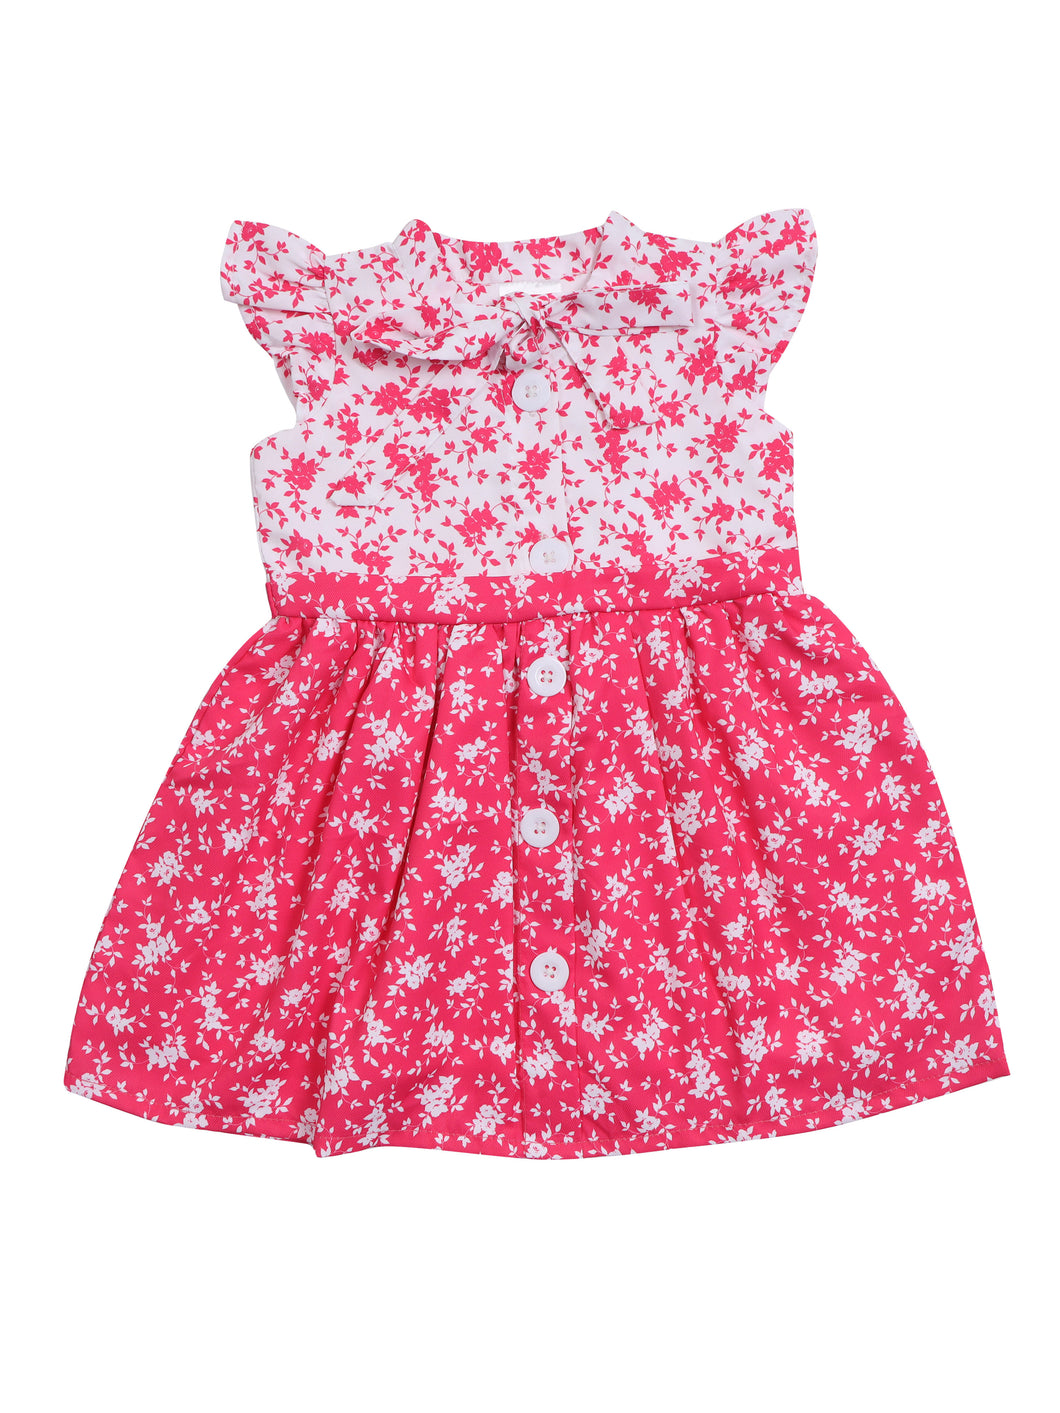 Doodle Girls Pink and White AOP Printed Tie-Up Dress